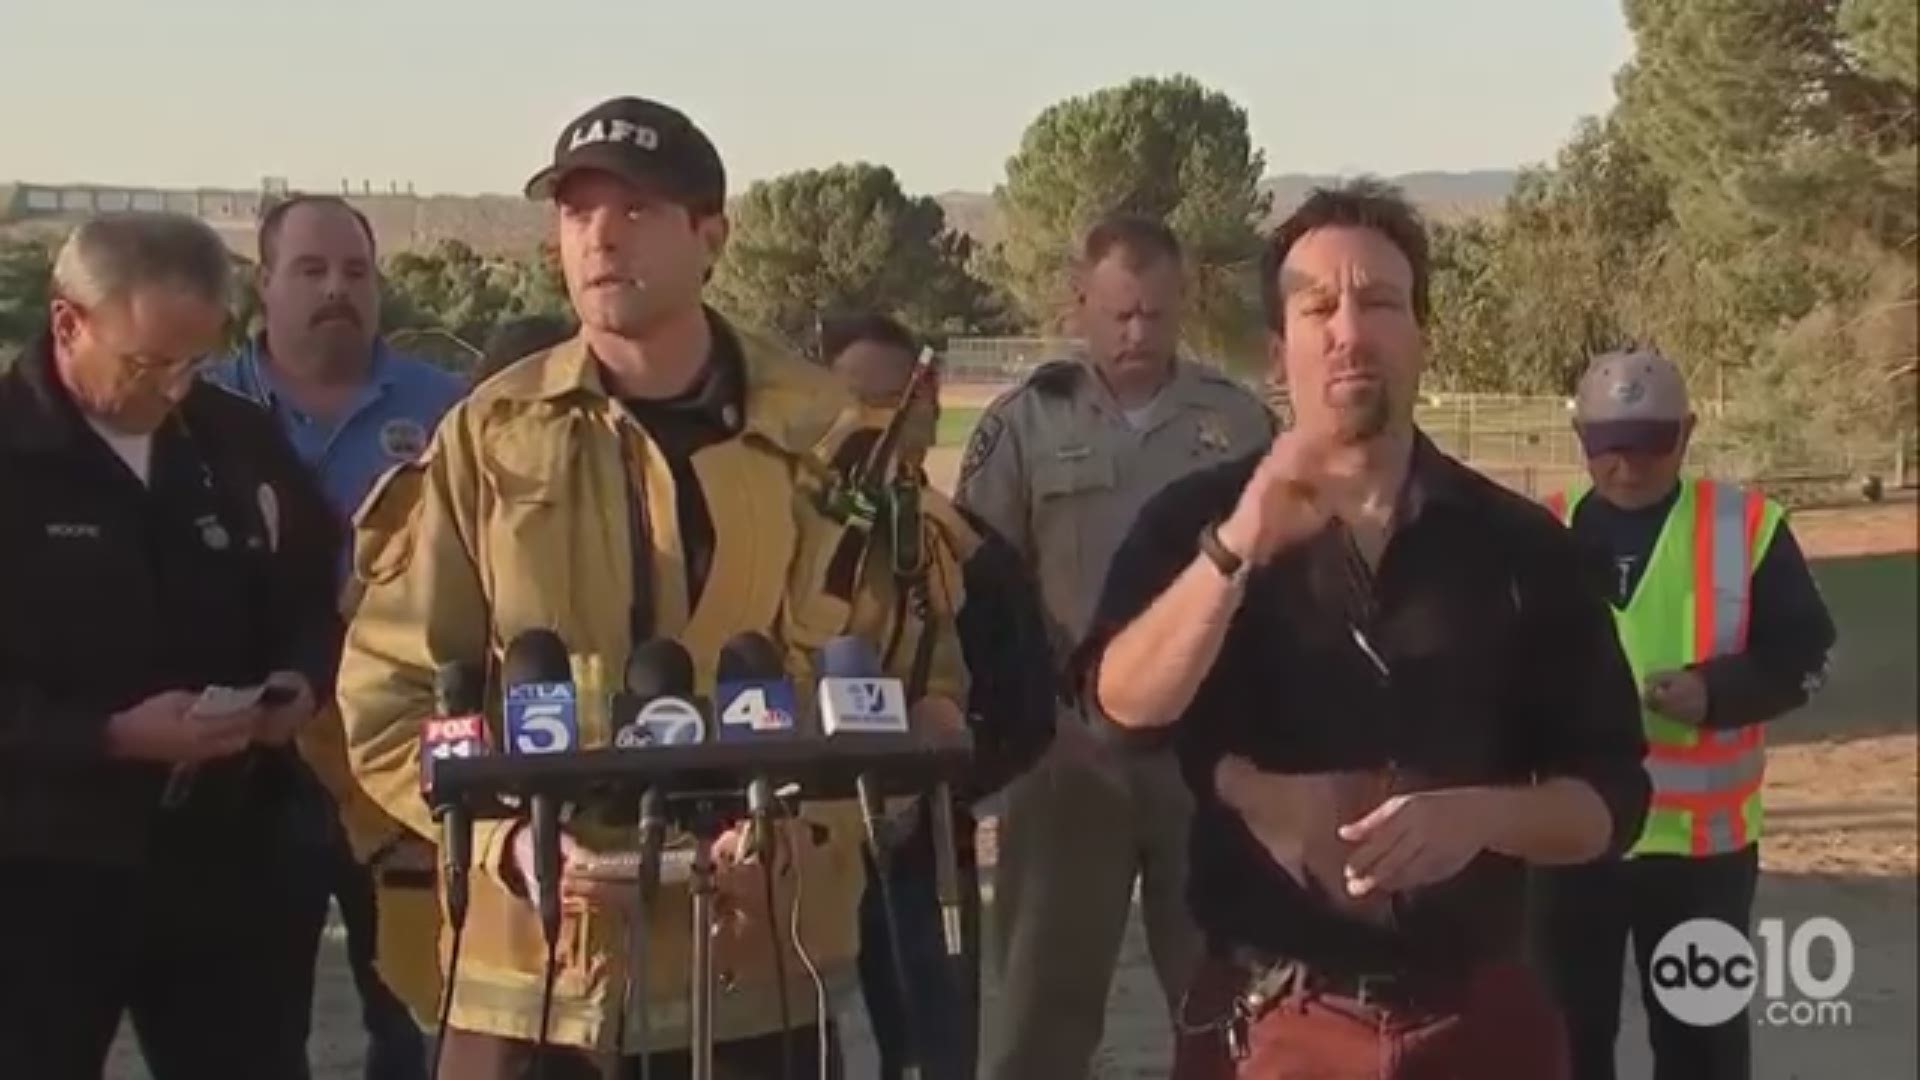 Leaders give an update on the Saddleridge Fire burning near Sylmar, Granada Hills and Porter Ranch in Southern California. The fire has damaged at least 25 houses.